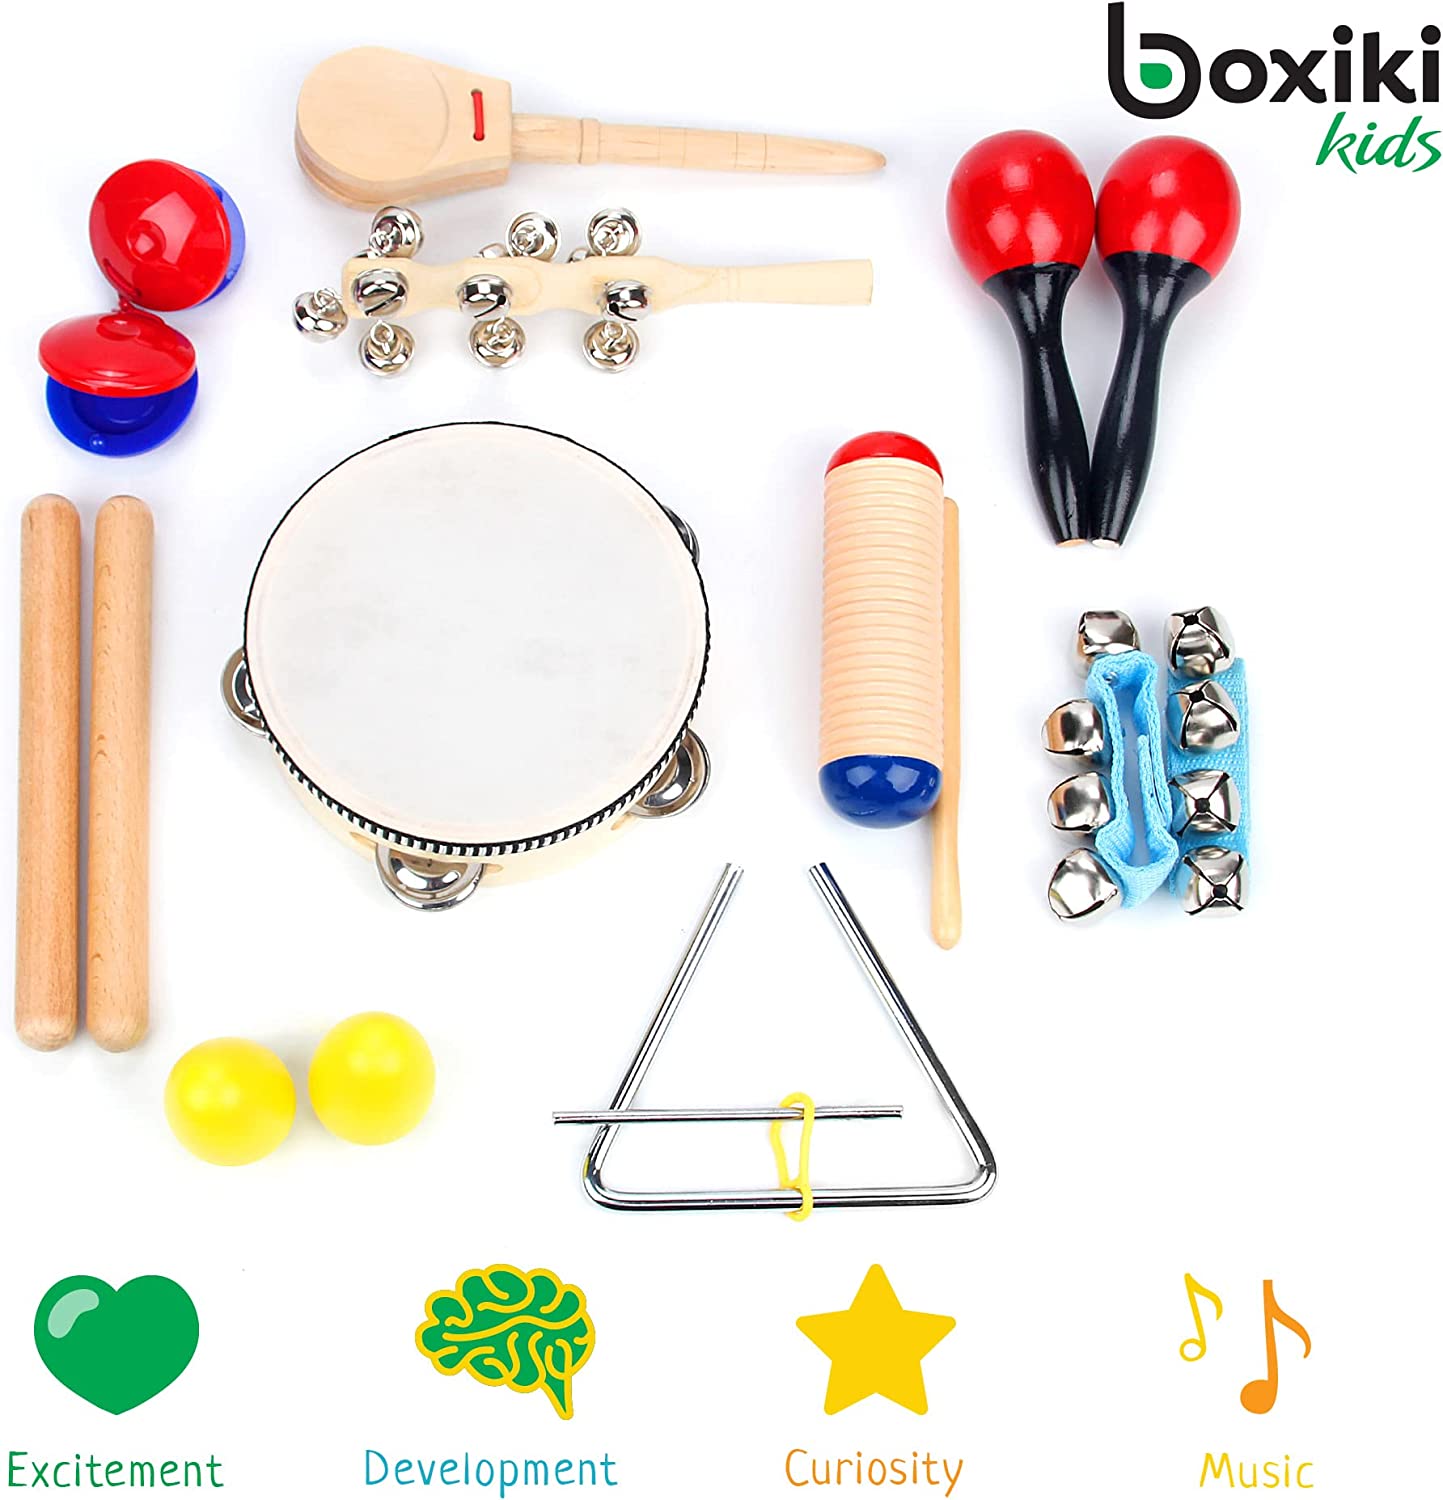 Musical Instruments Set of 16 PCS by Boxiki Kids. Rhythm & Musical Toys for Toddlers 1-3 Years Old. Includes Clave Sticks, Shakers, Tambourine, Wrist Bells & Maracas for Kids. - image 3 of 15